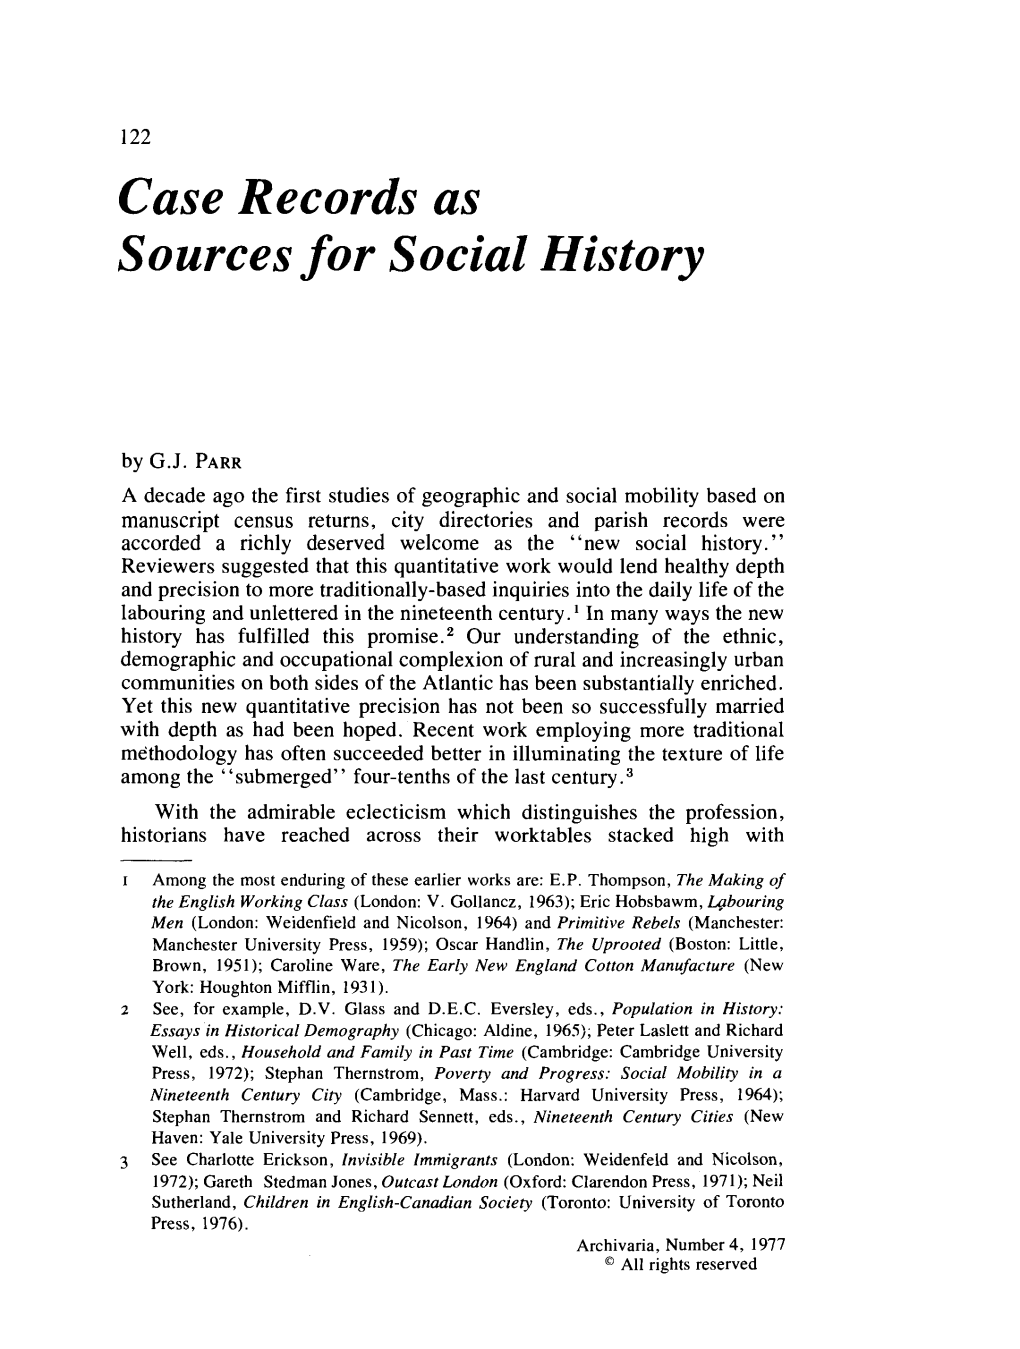 Case Records As Sources for Social History